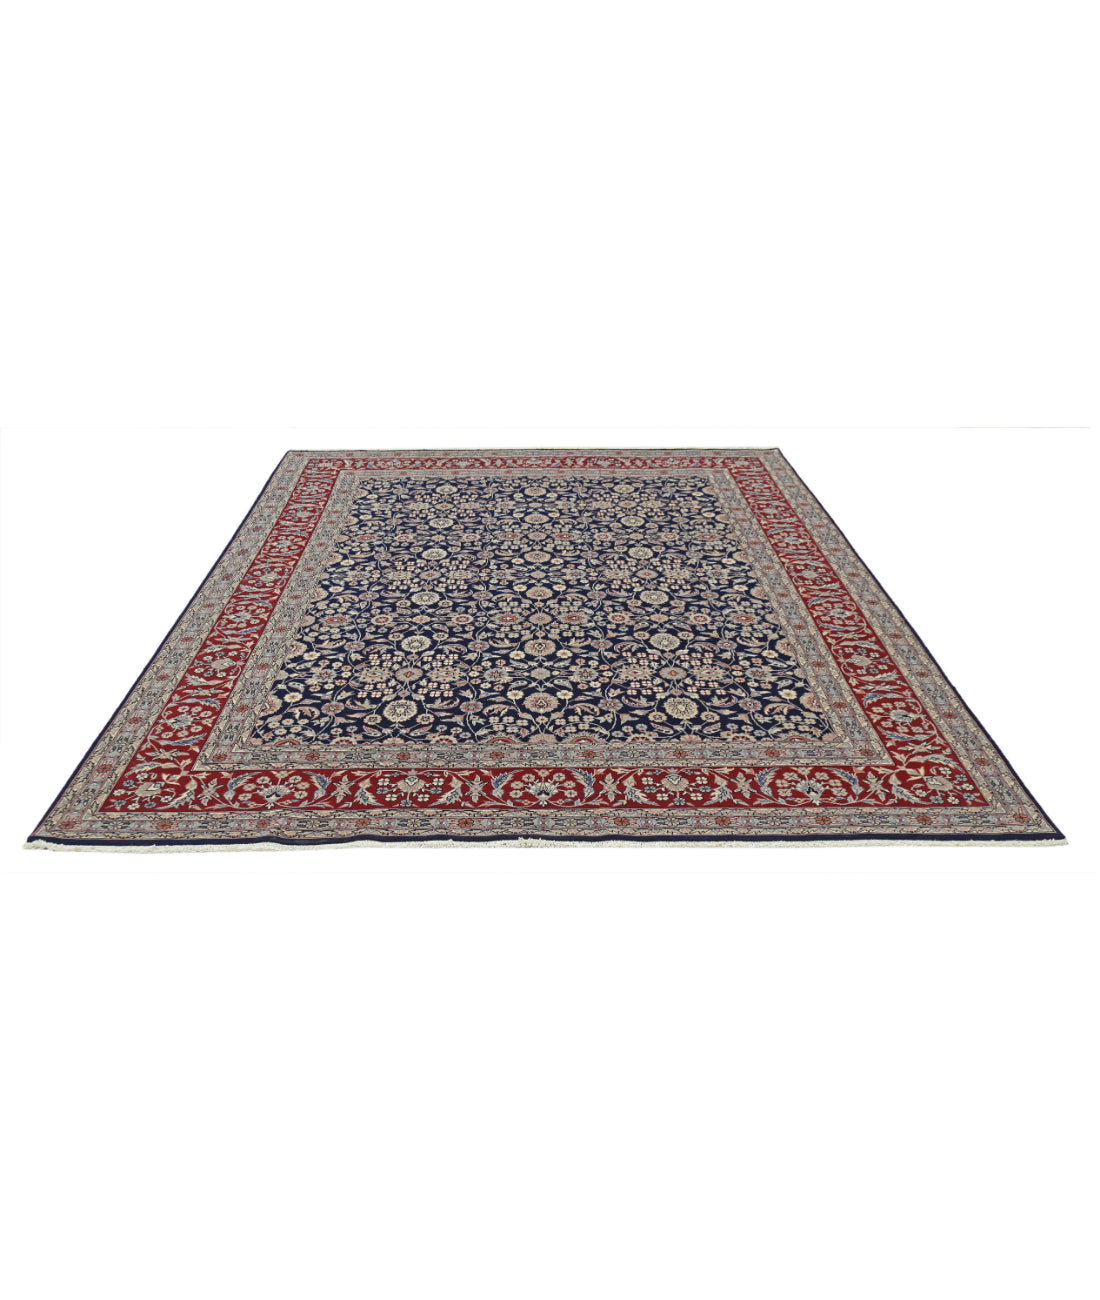 Hand Knotted Heritage Persian Style Tabriz Wool Rug - 8'0'' x 9'10'' 8'0'' x 9'10'' (240 X 295) / Blue / Red